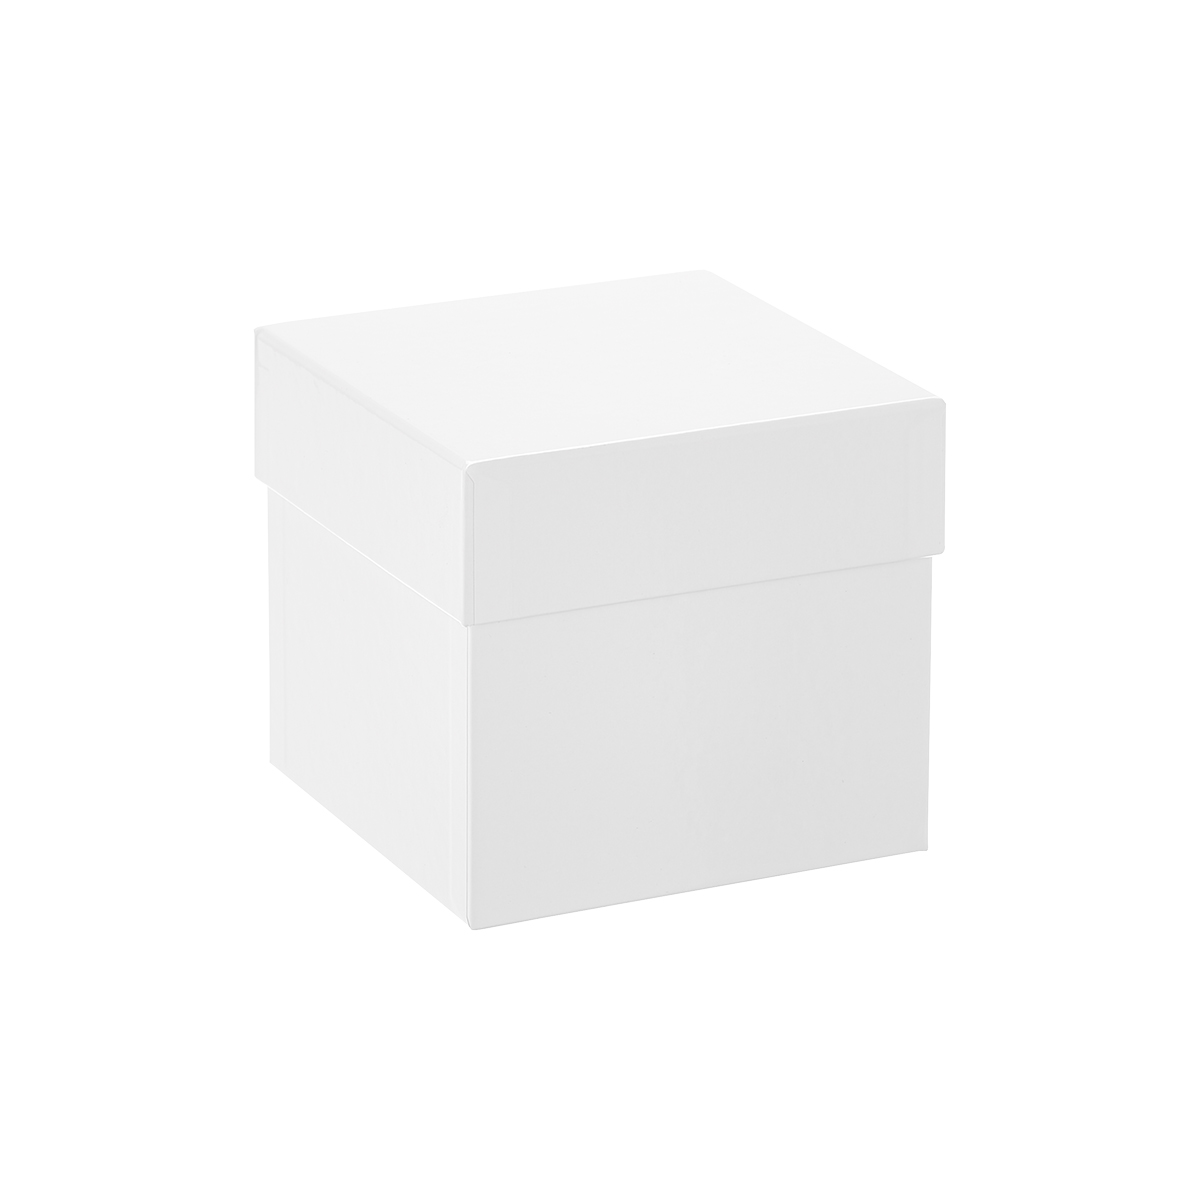 Premium Glossy White Gift Boxes | The Container Store